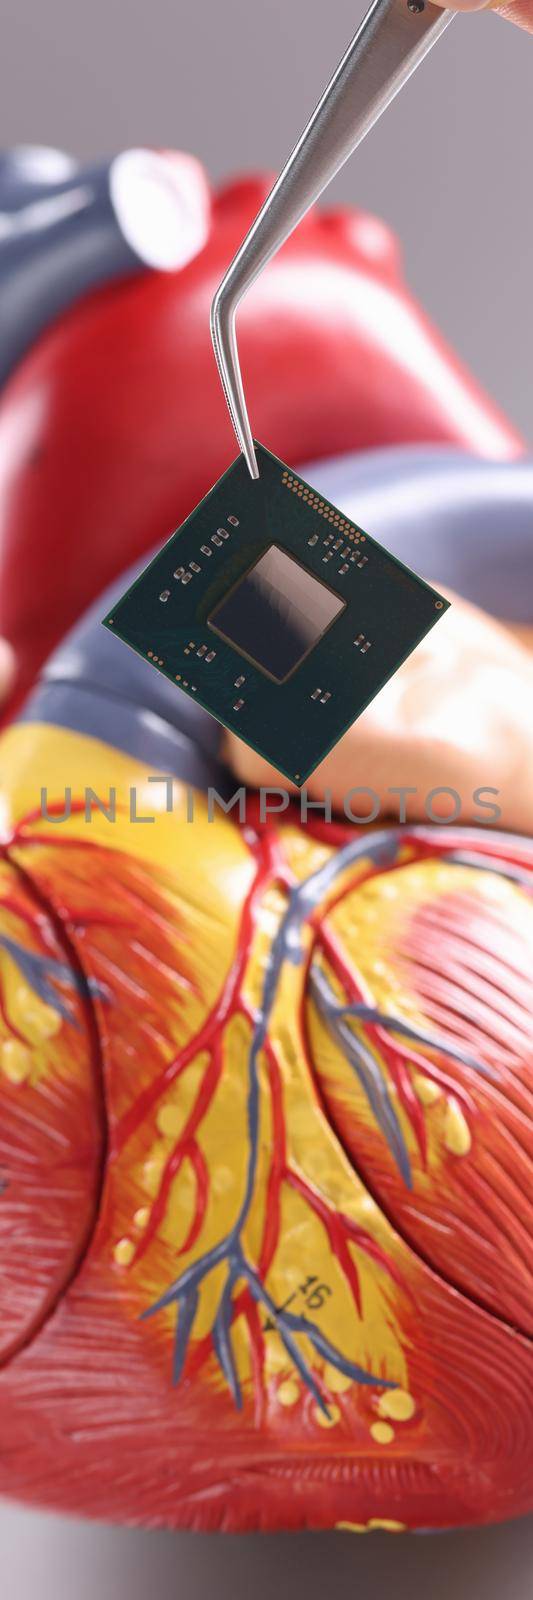 Hand inserting microchip into artificial heart mockup using tweezers closeup by kuprevich